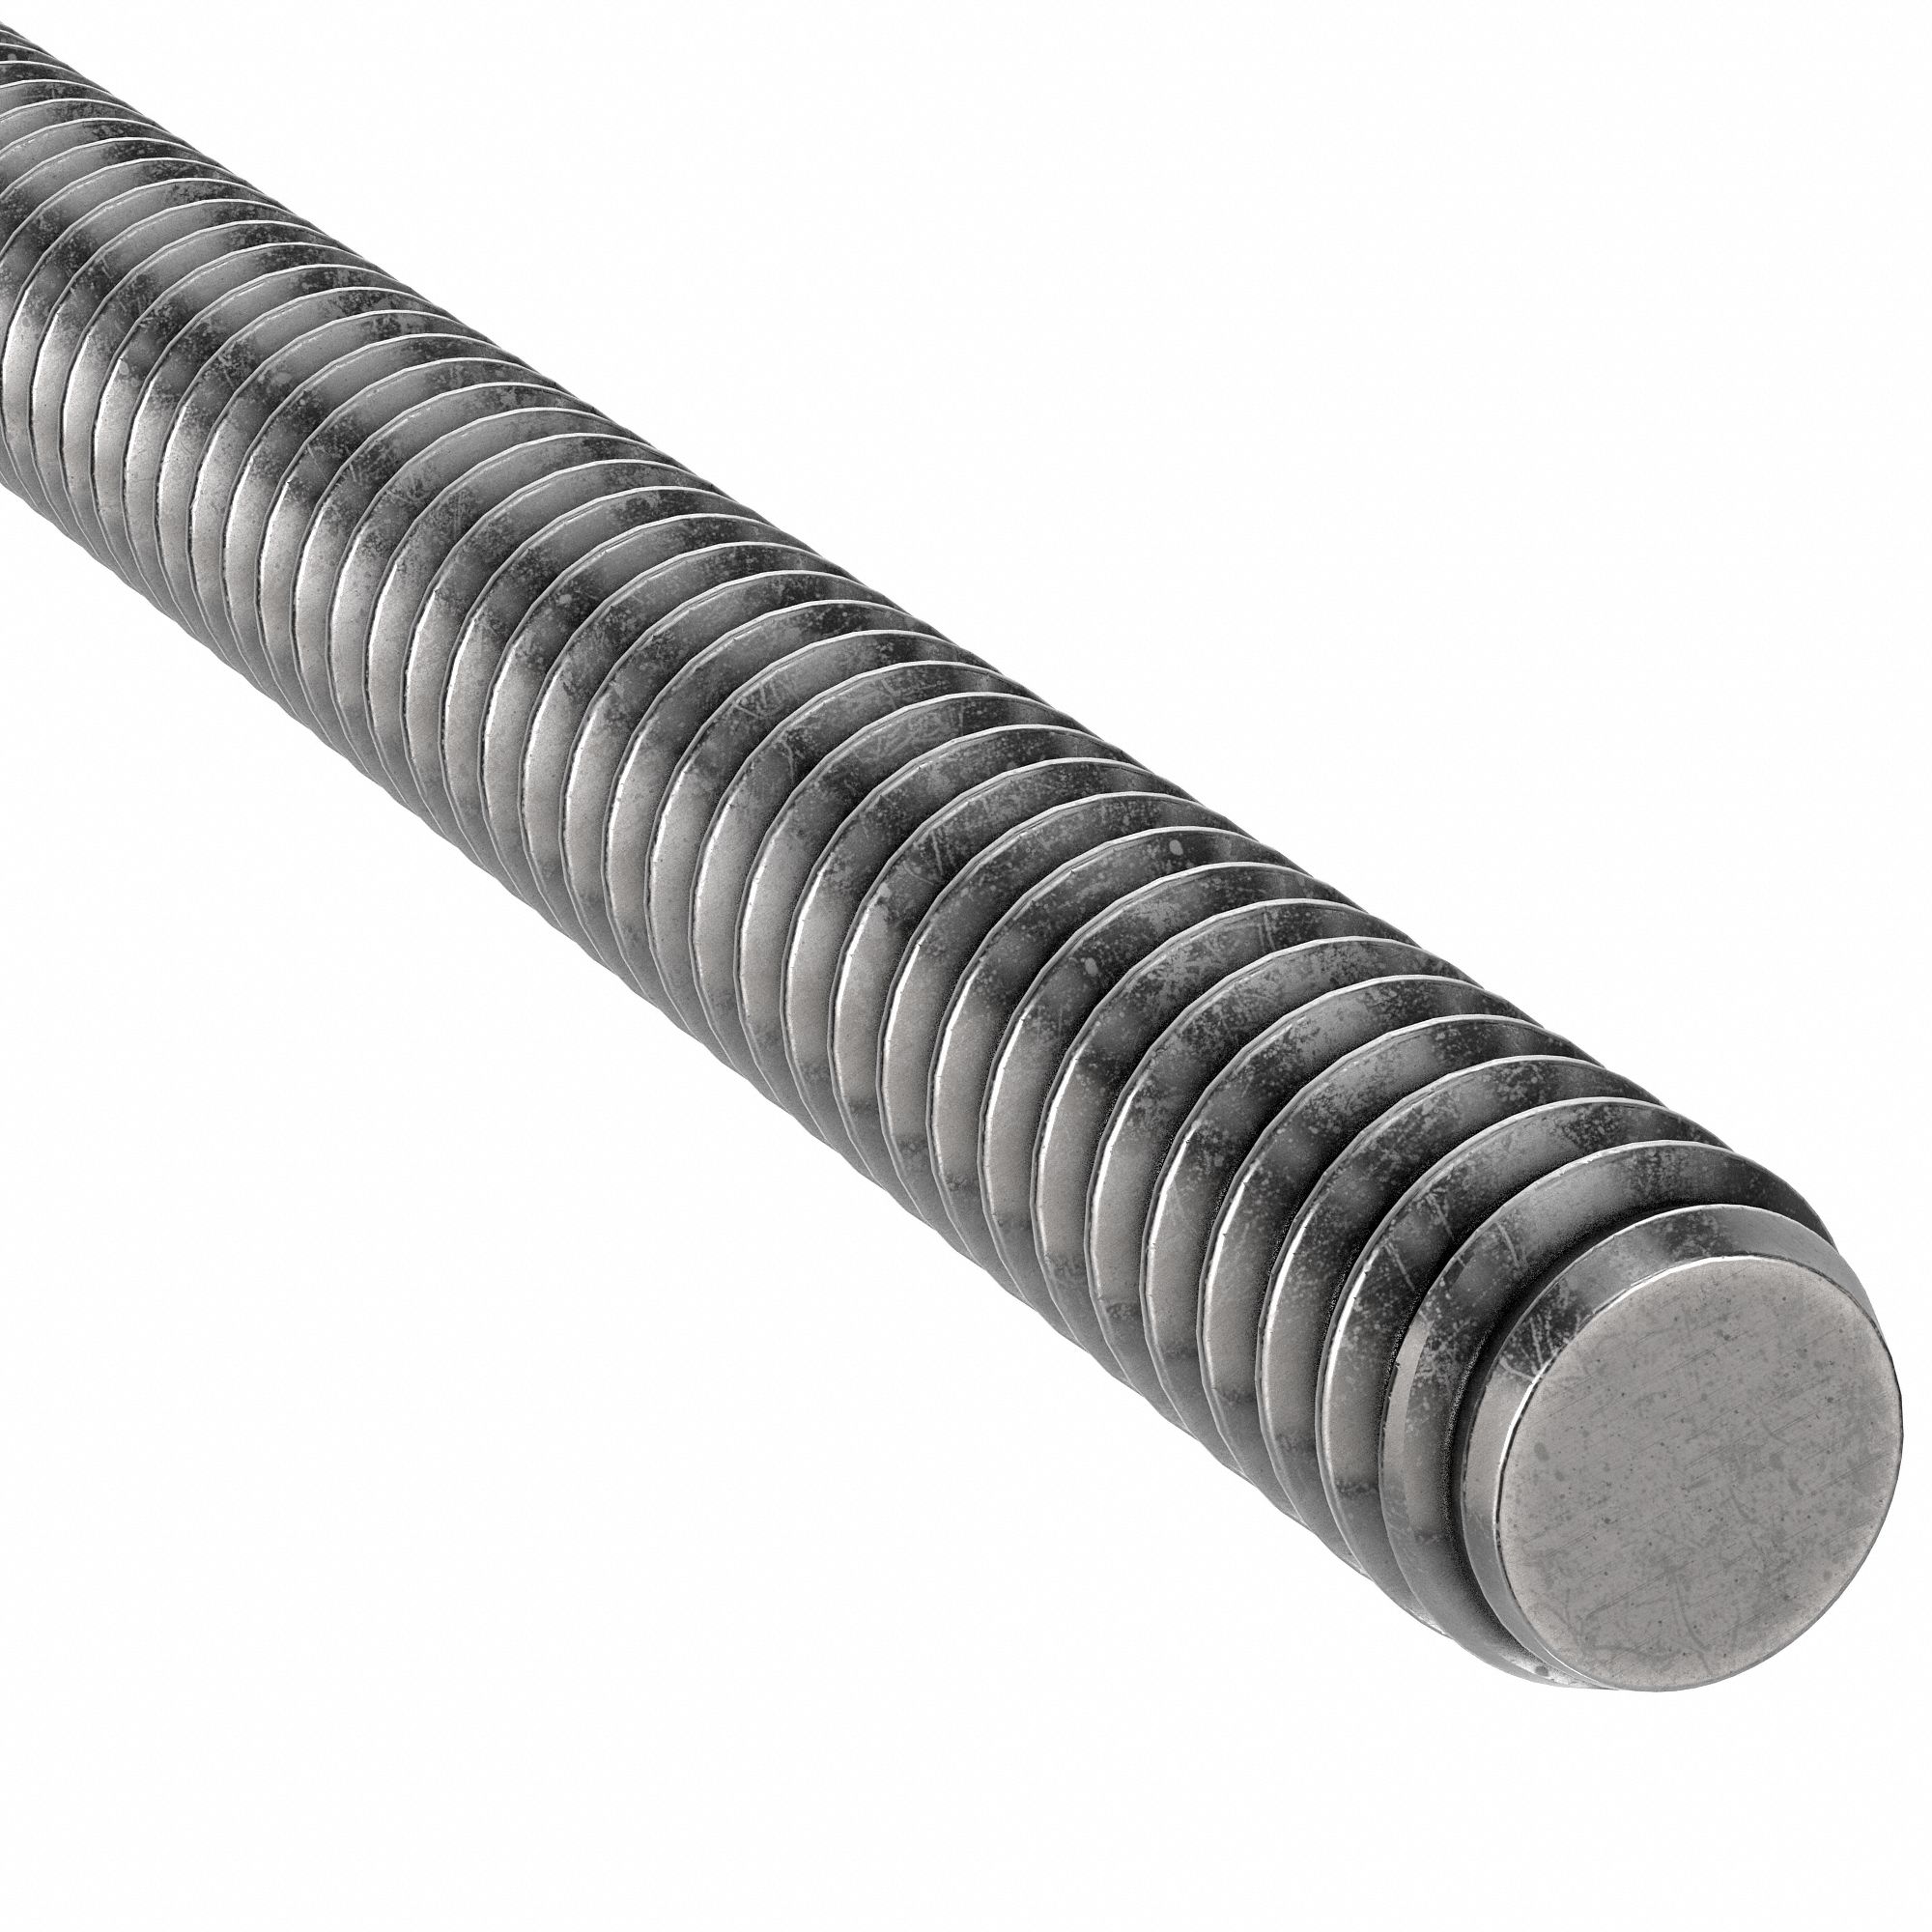 GRAINGER APPROVED 17902 Threaded Rod,Low Carbon Steel,M6-1.0x1m 